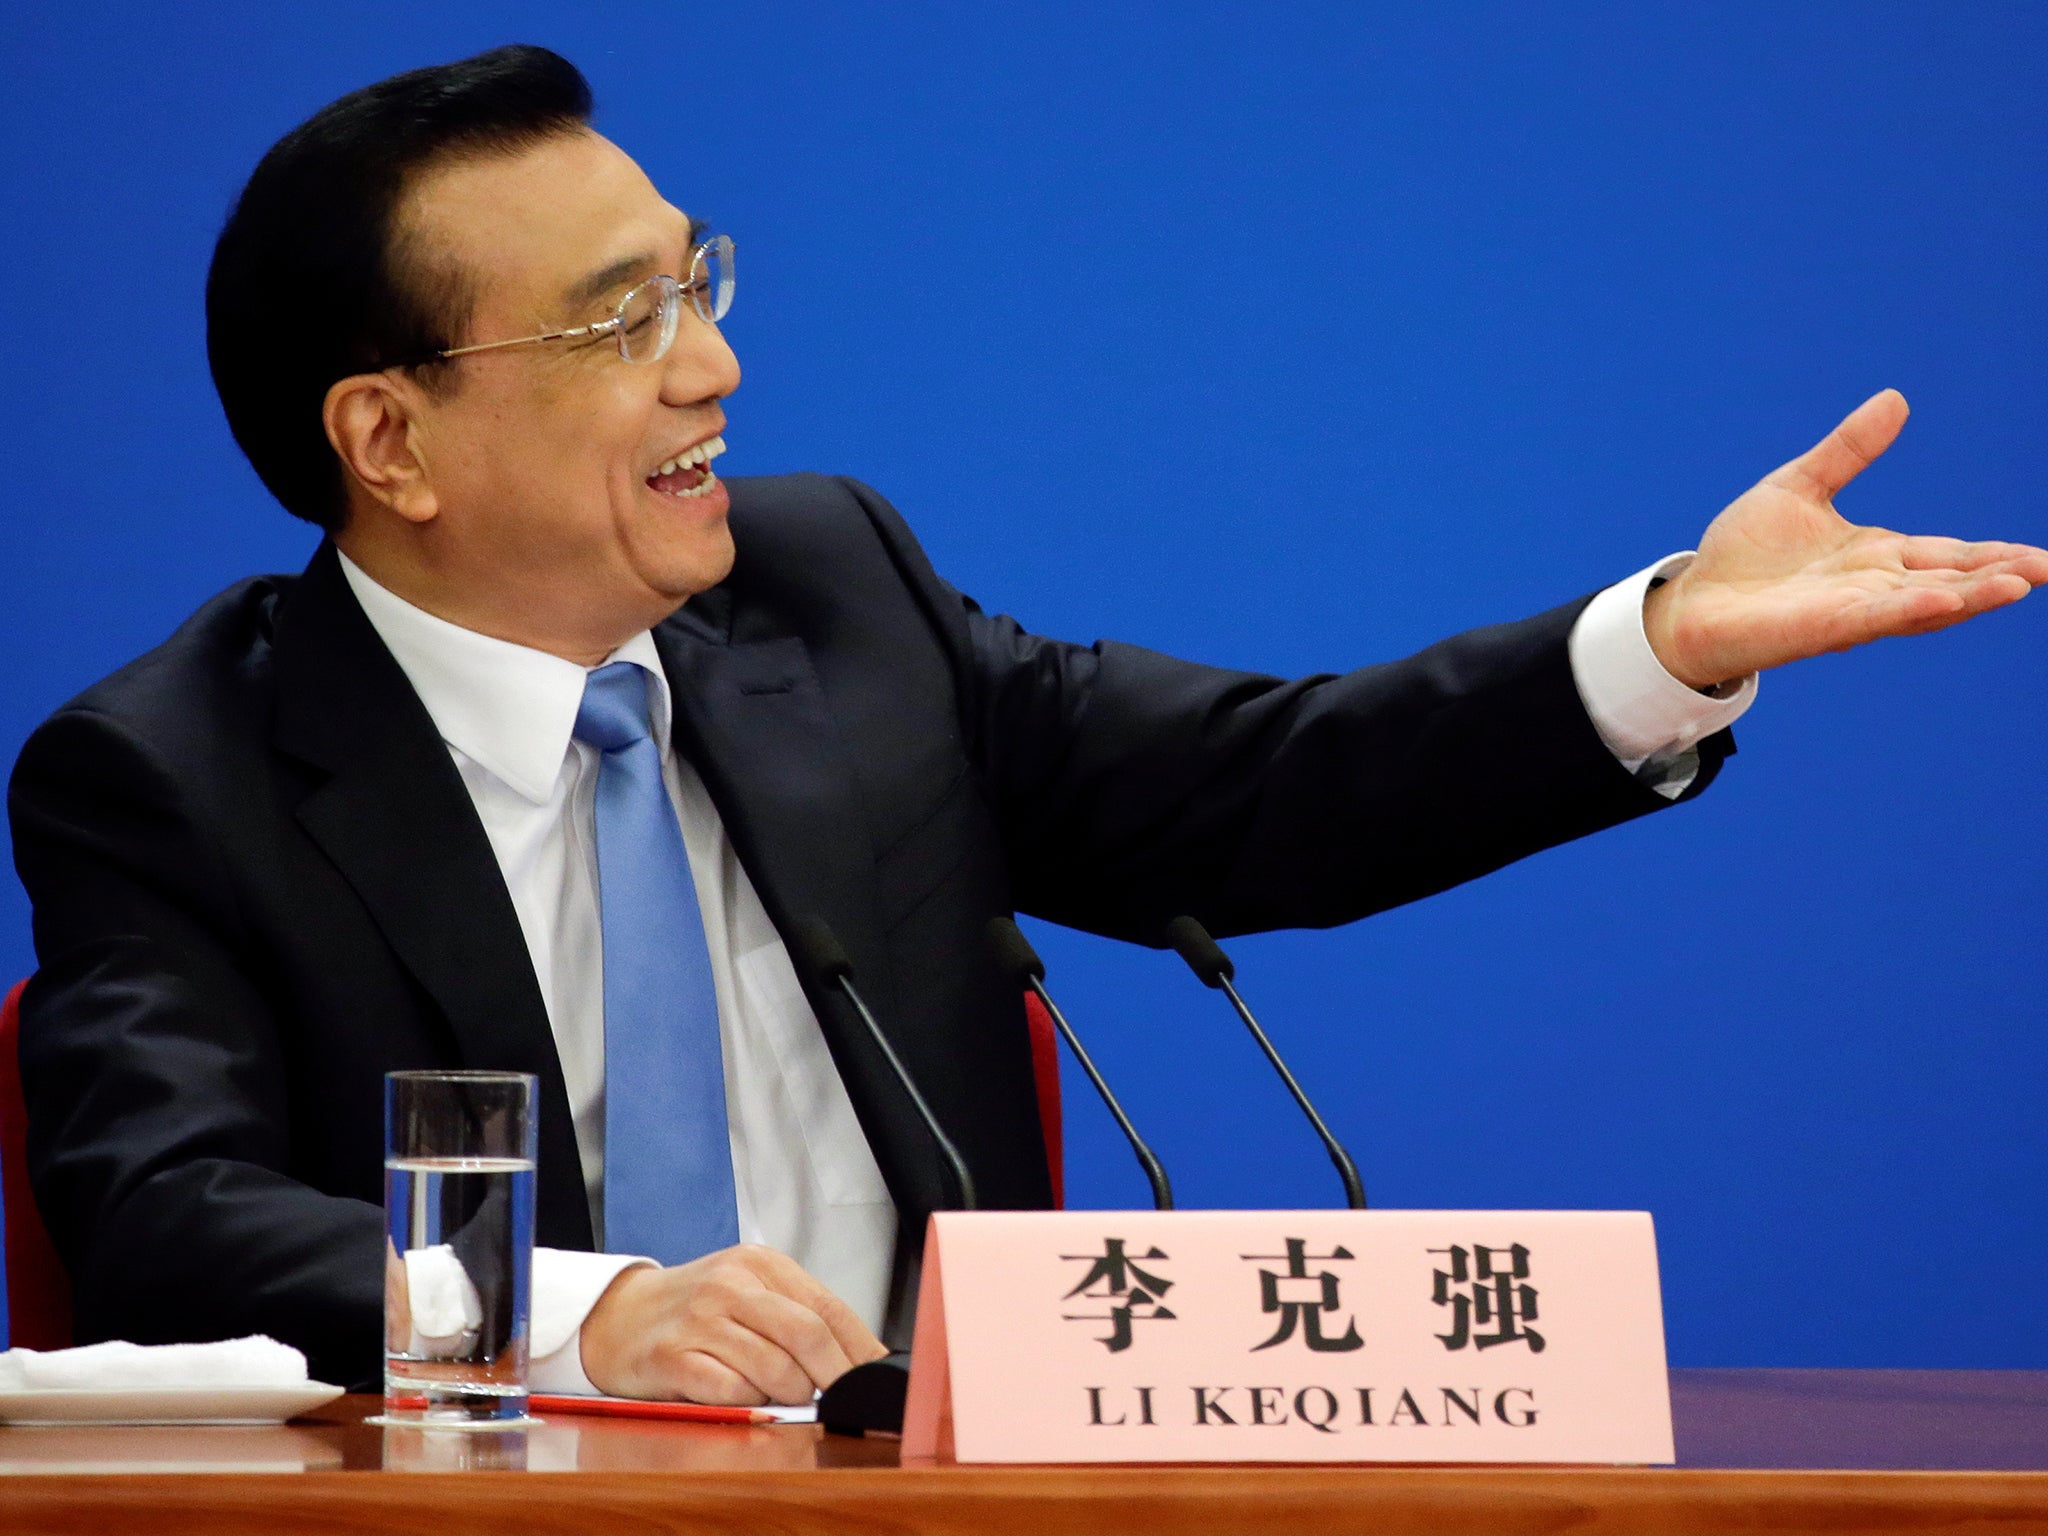 China's Premier Li Keqiang speaking during a news conference after the closing ceremony of China's National People's Congress